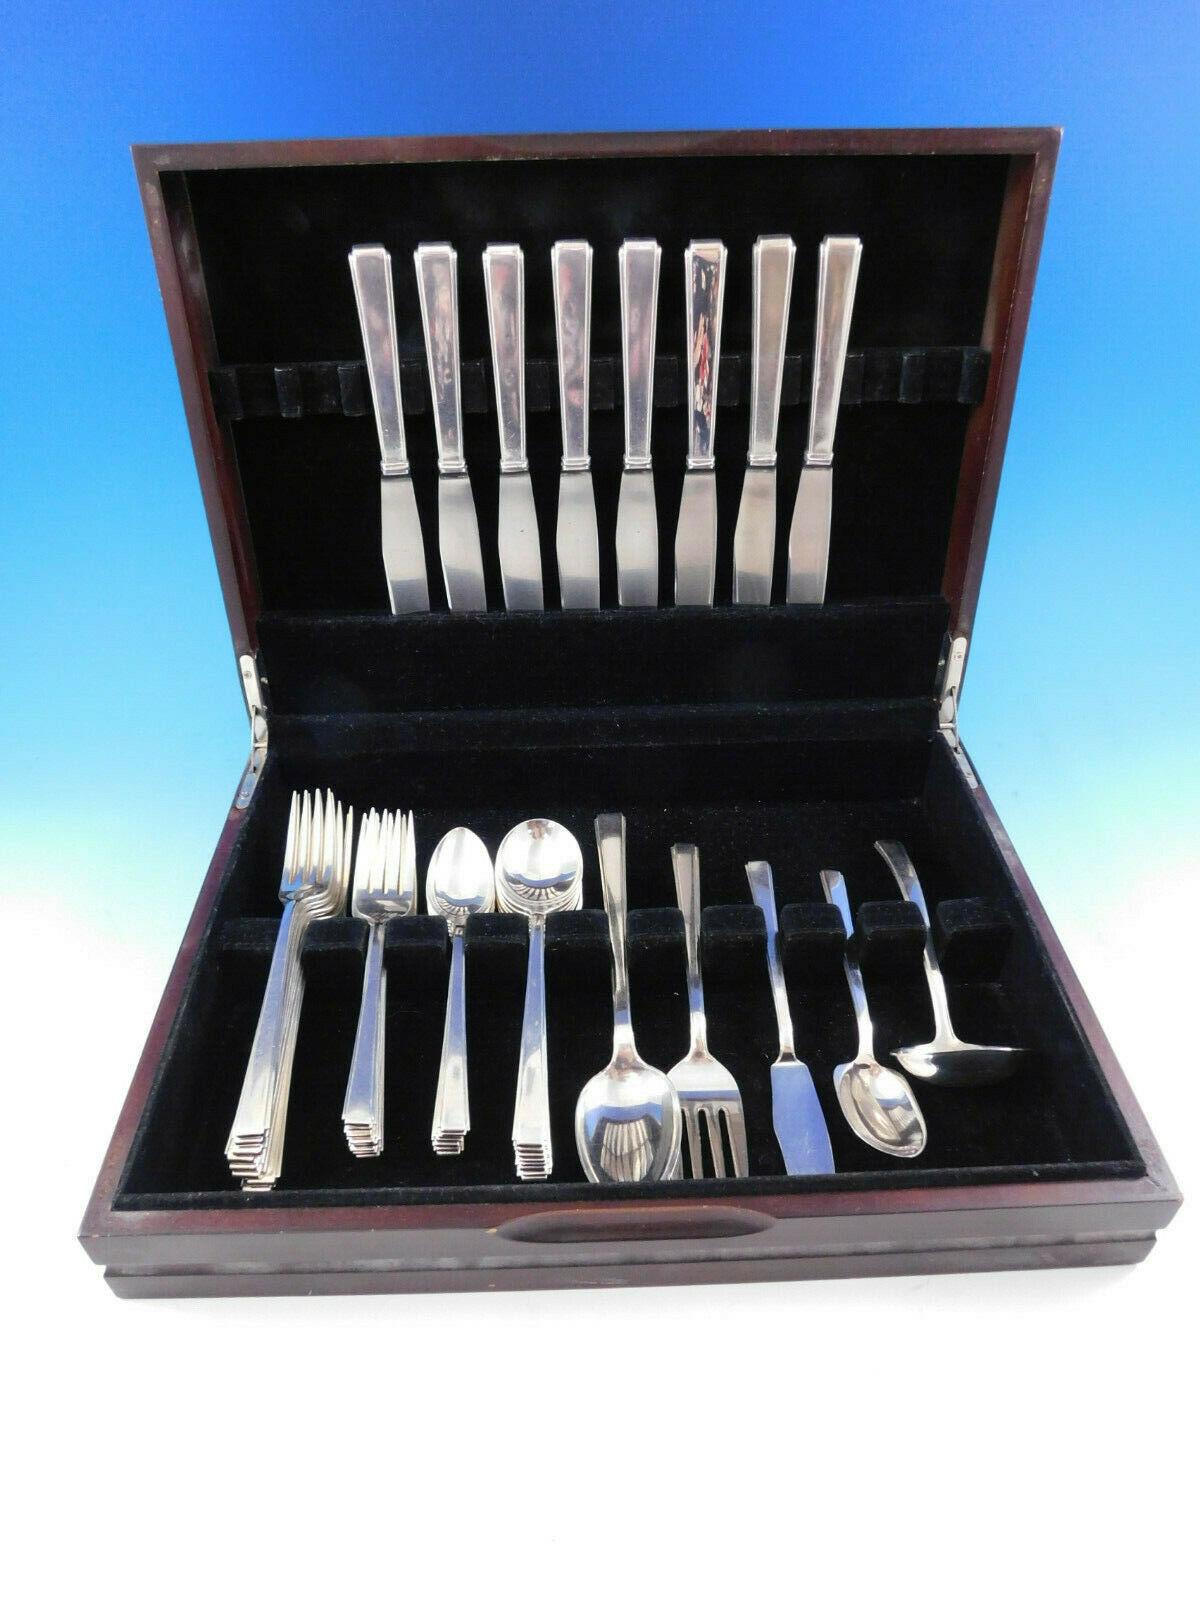 Modern Classic by Lunt sterling silver flatware set, 45 pieces. This set includes:

8 knives, 8 7/8